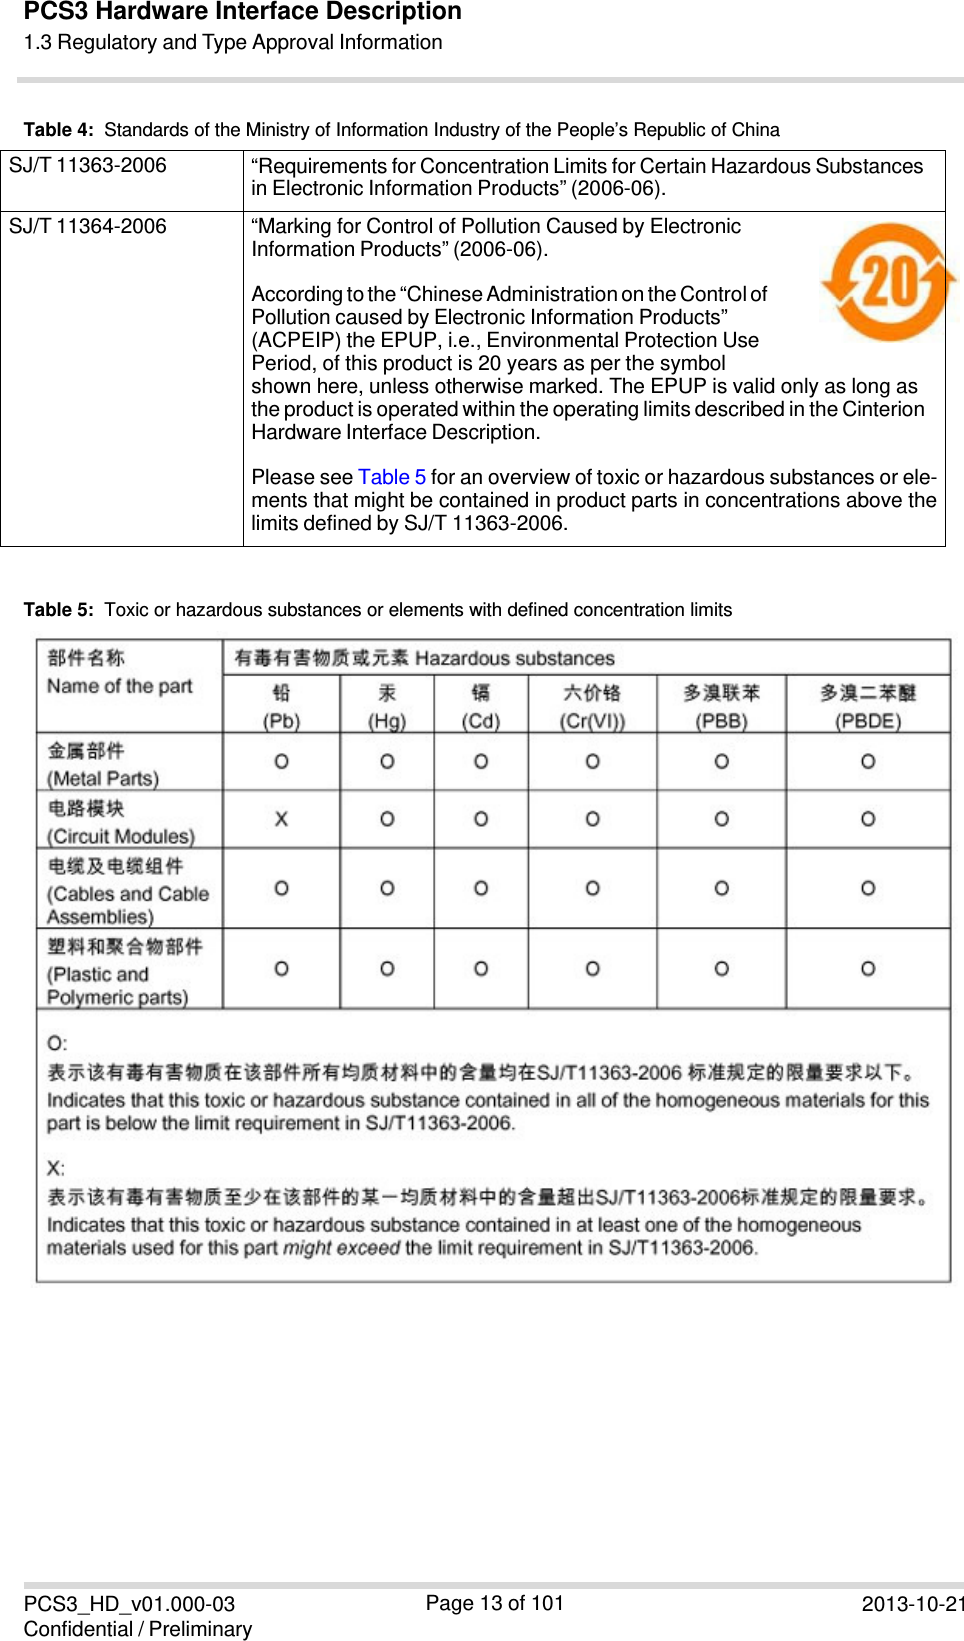 PCS3_HD_v01.000-03 Confidential / Preliminary Page 13 of 101 2013-10-21　PCS3 Hardware Interface Description1.3 Regulatory and Type Approval Information Table 4:  Standards of the Ministry of Information Industry of the People’s Republic of China SJ/T 11363-2006  “Requirements for Concentration Limits for Certain Hazardous Substances in Electronic Information Products” (2006-06). SJ/T 11364-2006  “Marking for Control of Pollution Caused by Electronic Information Products” (2006-06). According to the “Chinese Administration on the Control of Pollution caused by Electronic Information Products” (ACPEIP) the EPUP, i.e., Environmental Protection Use Period, of this product is 20 years as per the symbol shown here, unless otherwise marked. The EPUP is valid only as long as the product is operated within the operating limits described in the Cinterion Hardware Interface Description. Please see Table 5 for an overview of toxic or hazardous substances or ele- ments that might be contained in product parts in concentrations above the limits defined by SJ/T 11363-2006. Table 5:  Toxic or hazardous substances or elements with defined concentration limits  